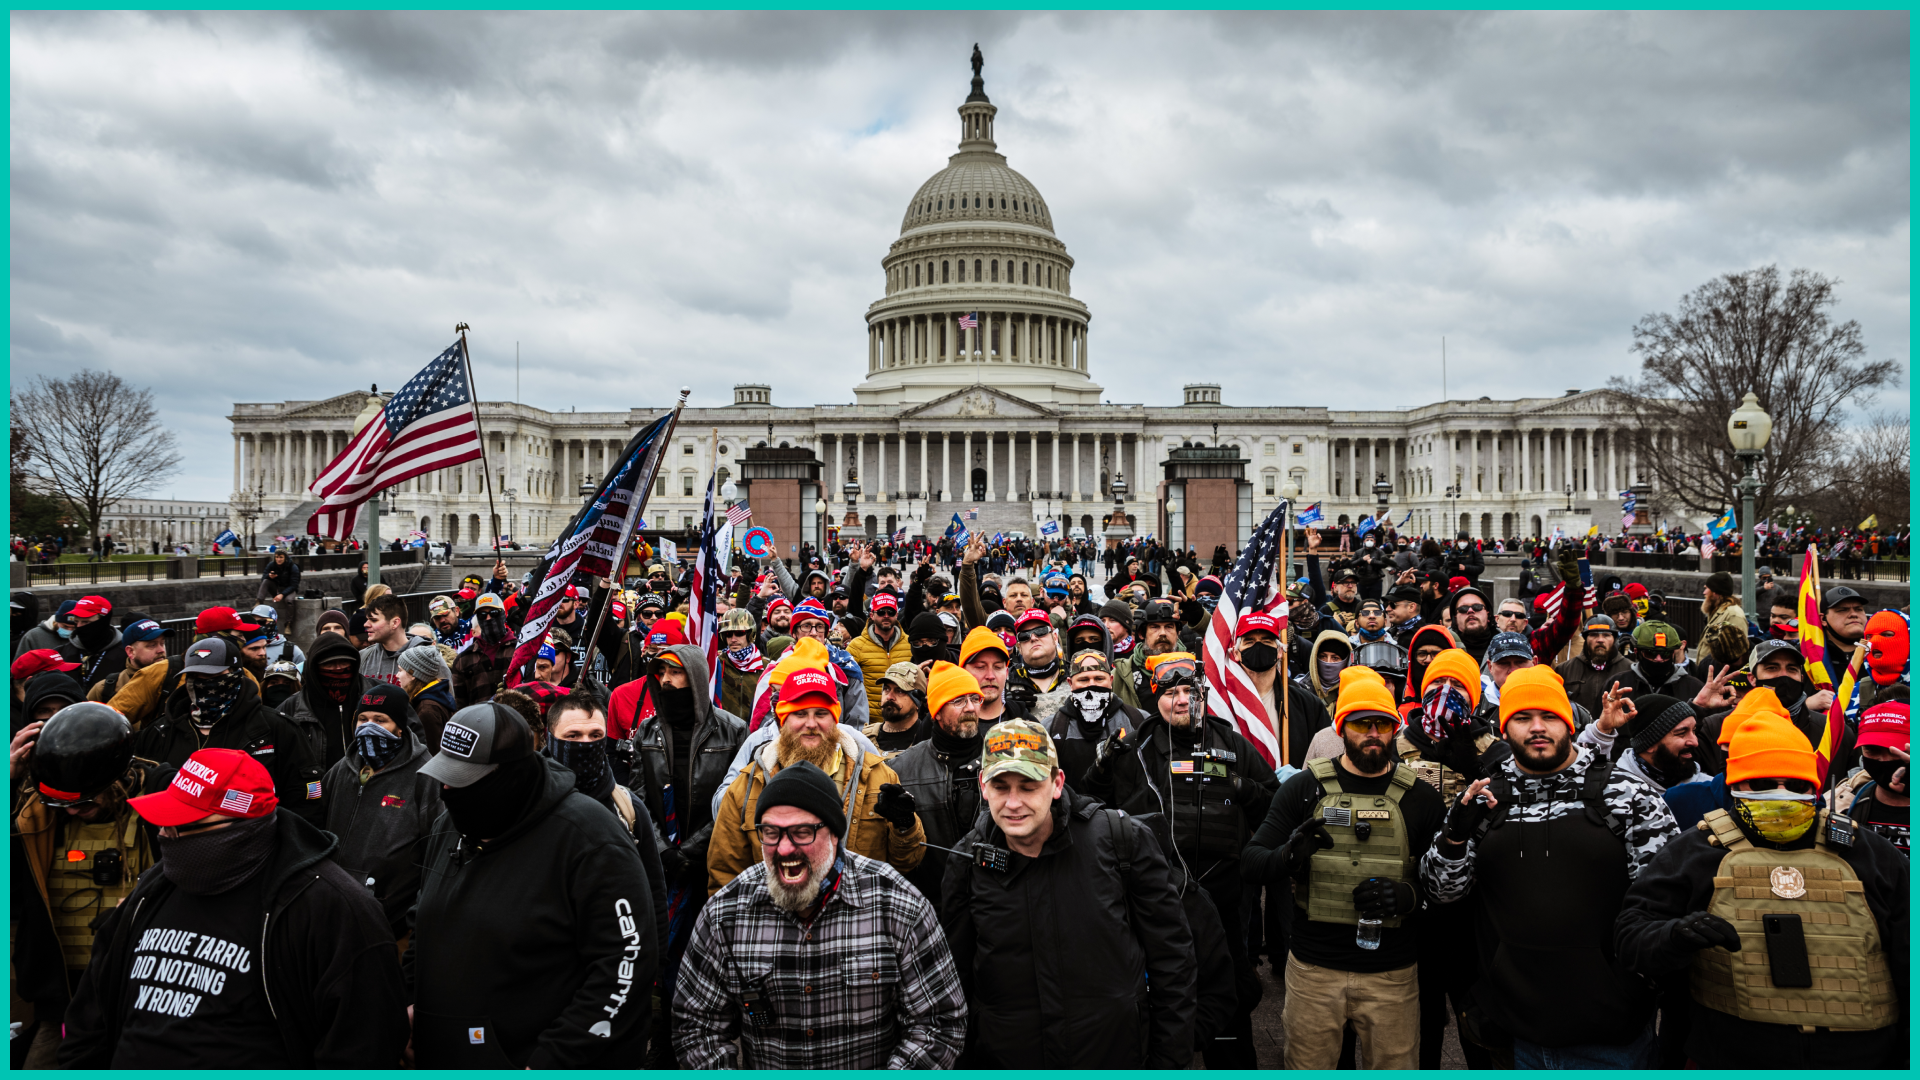 Pro-Trump protesters gather in front of the U.S. Capitol Building on January 6